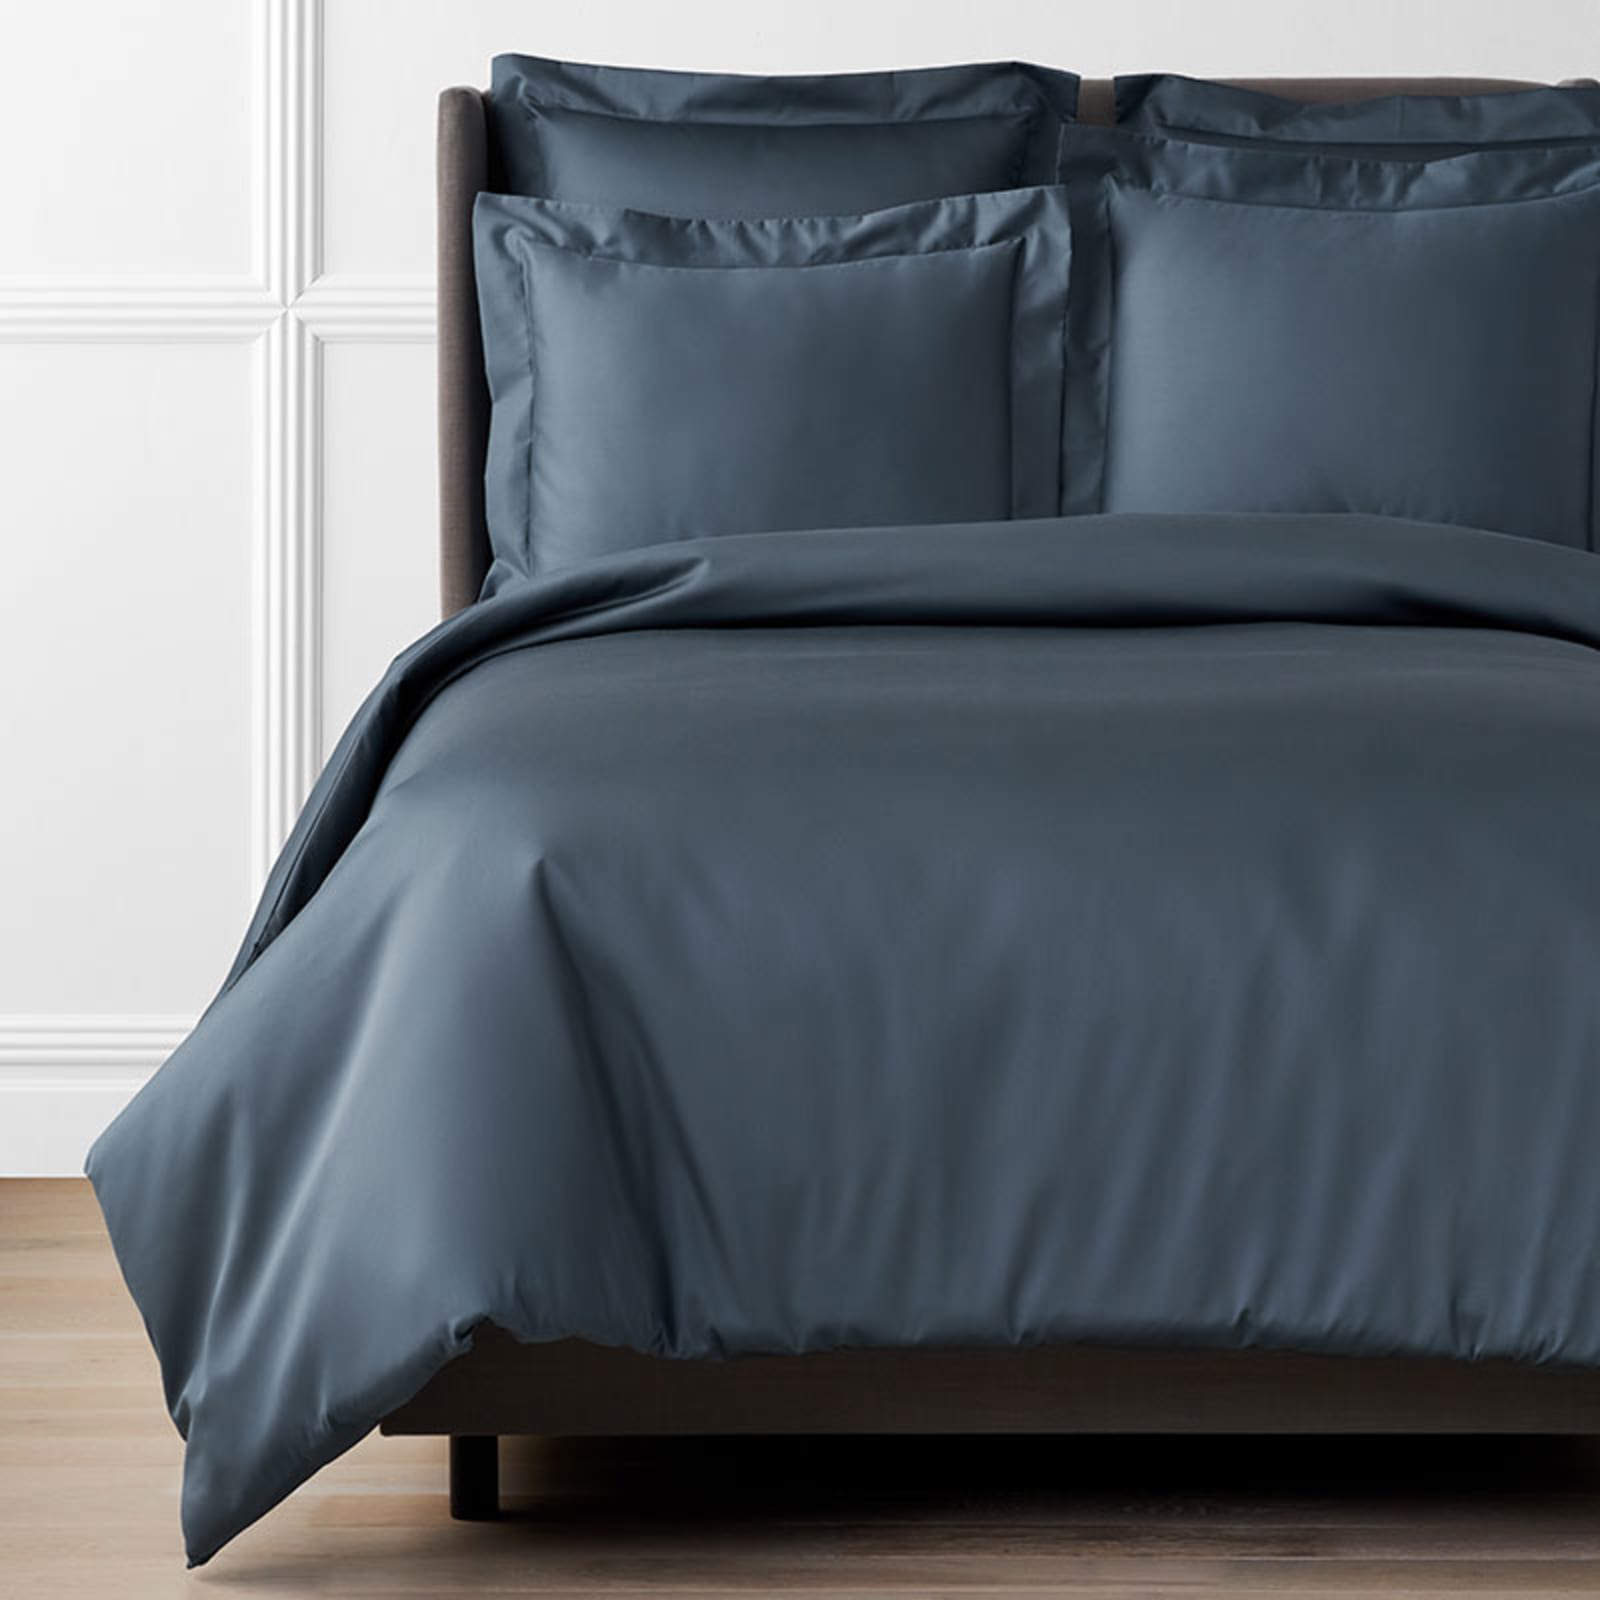 Legends Hotel™ Supima® Cotton Wrinkle-Free Sateen Duvet Cover | The Company Store